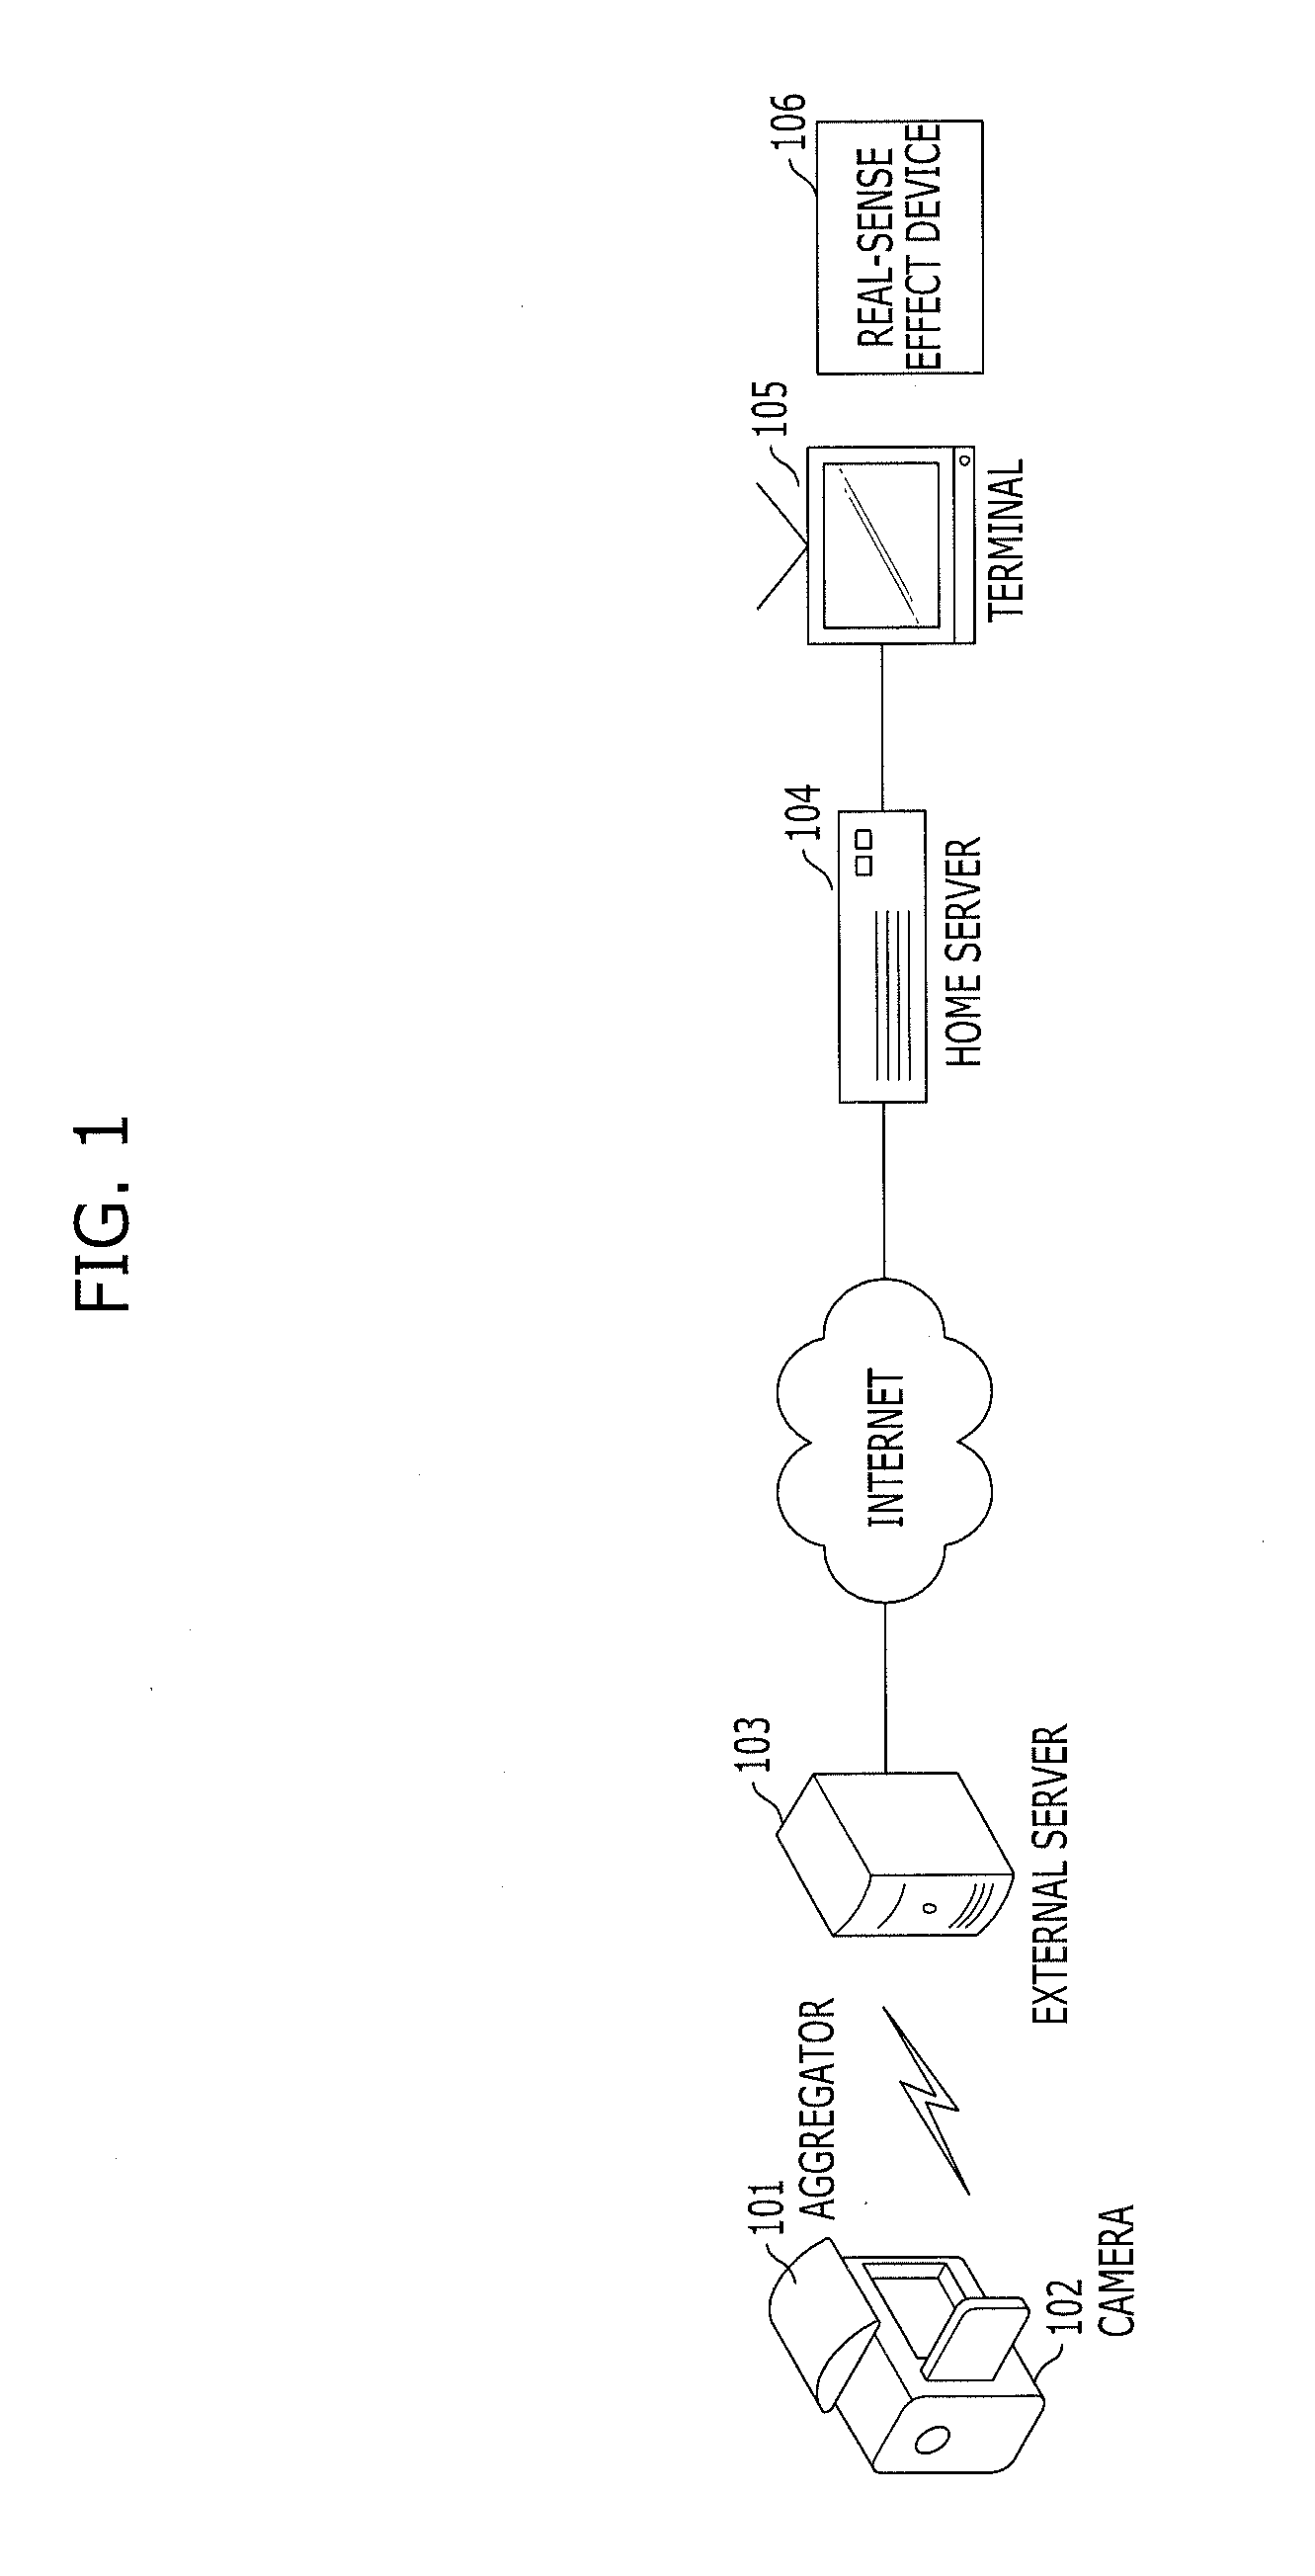 System and method for real-sense acquisition